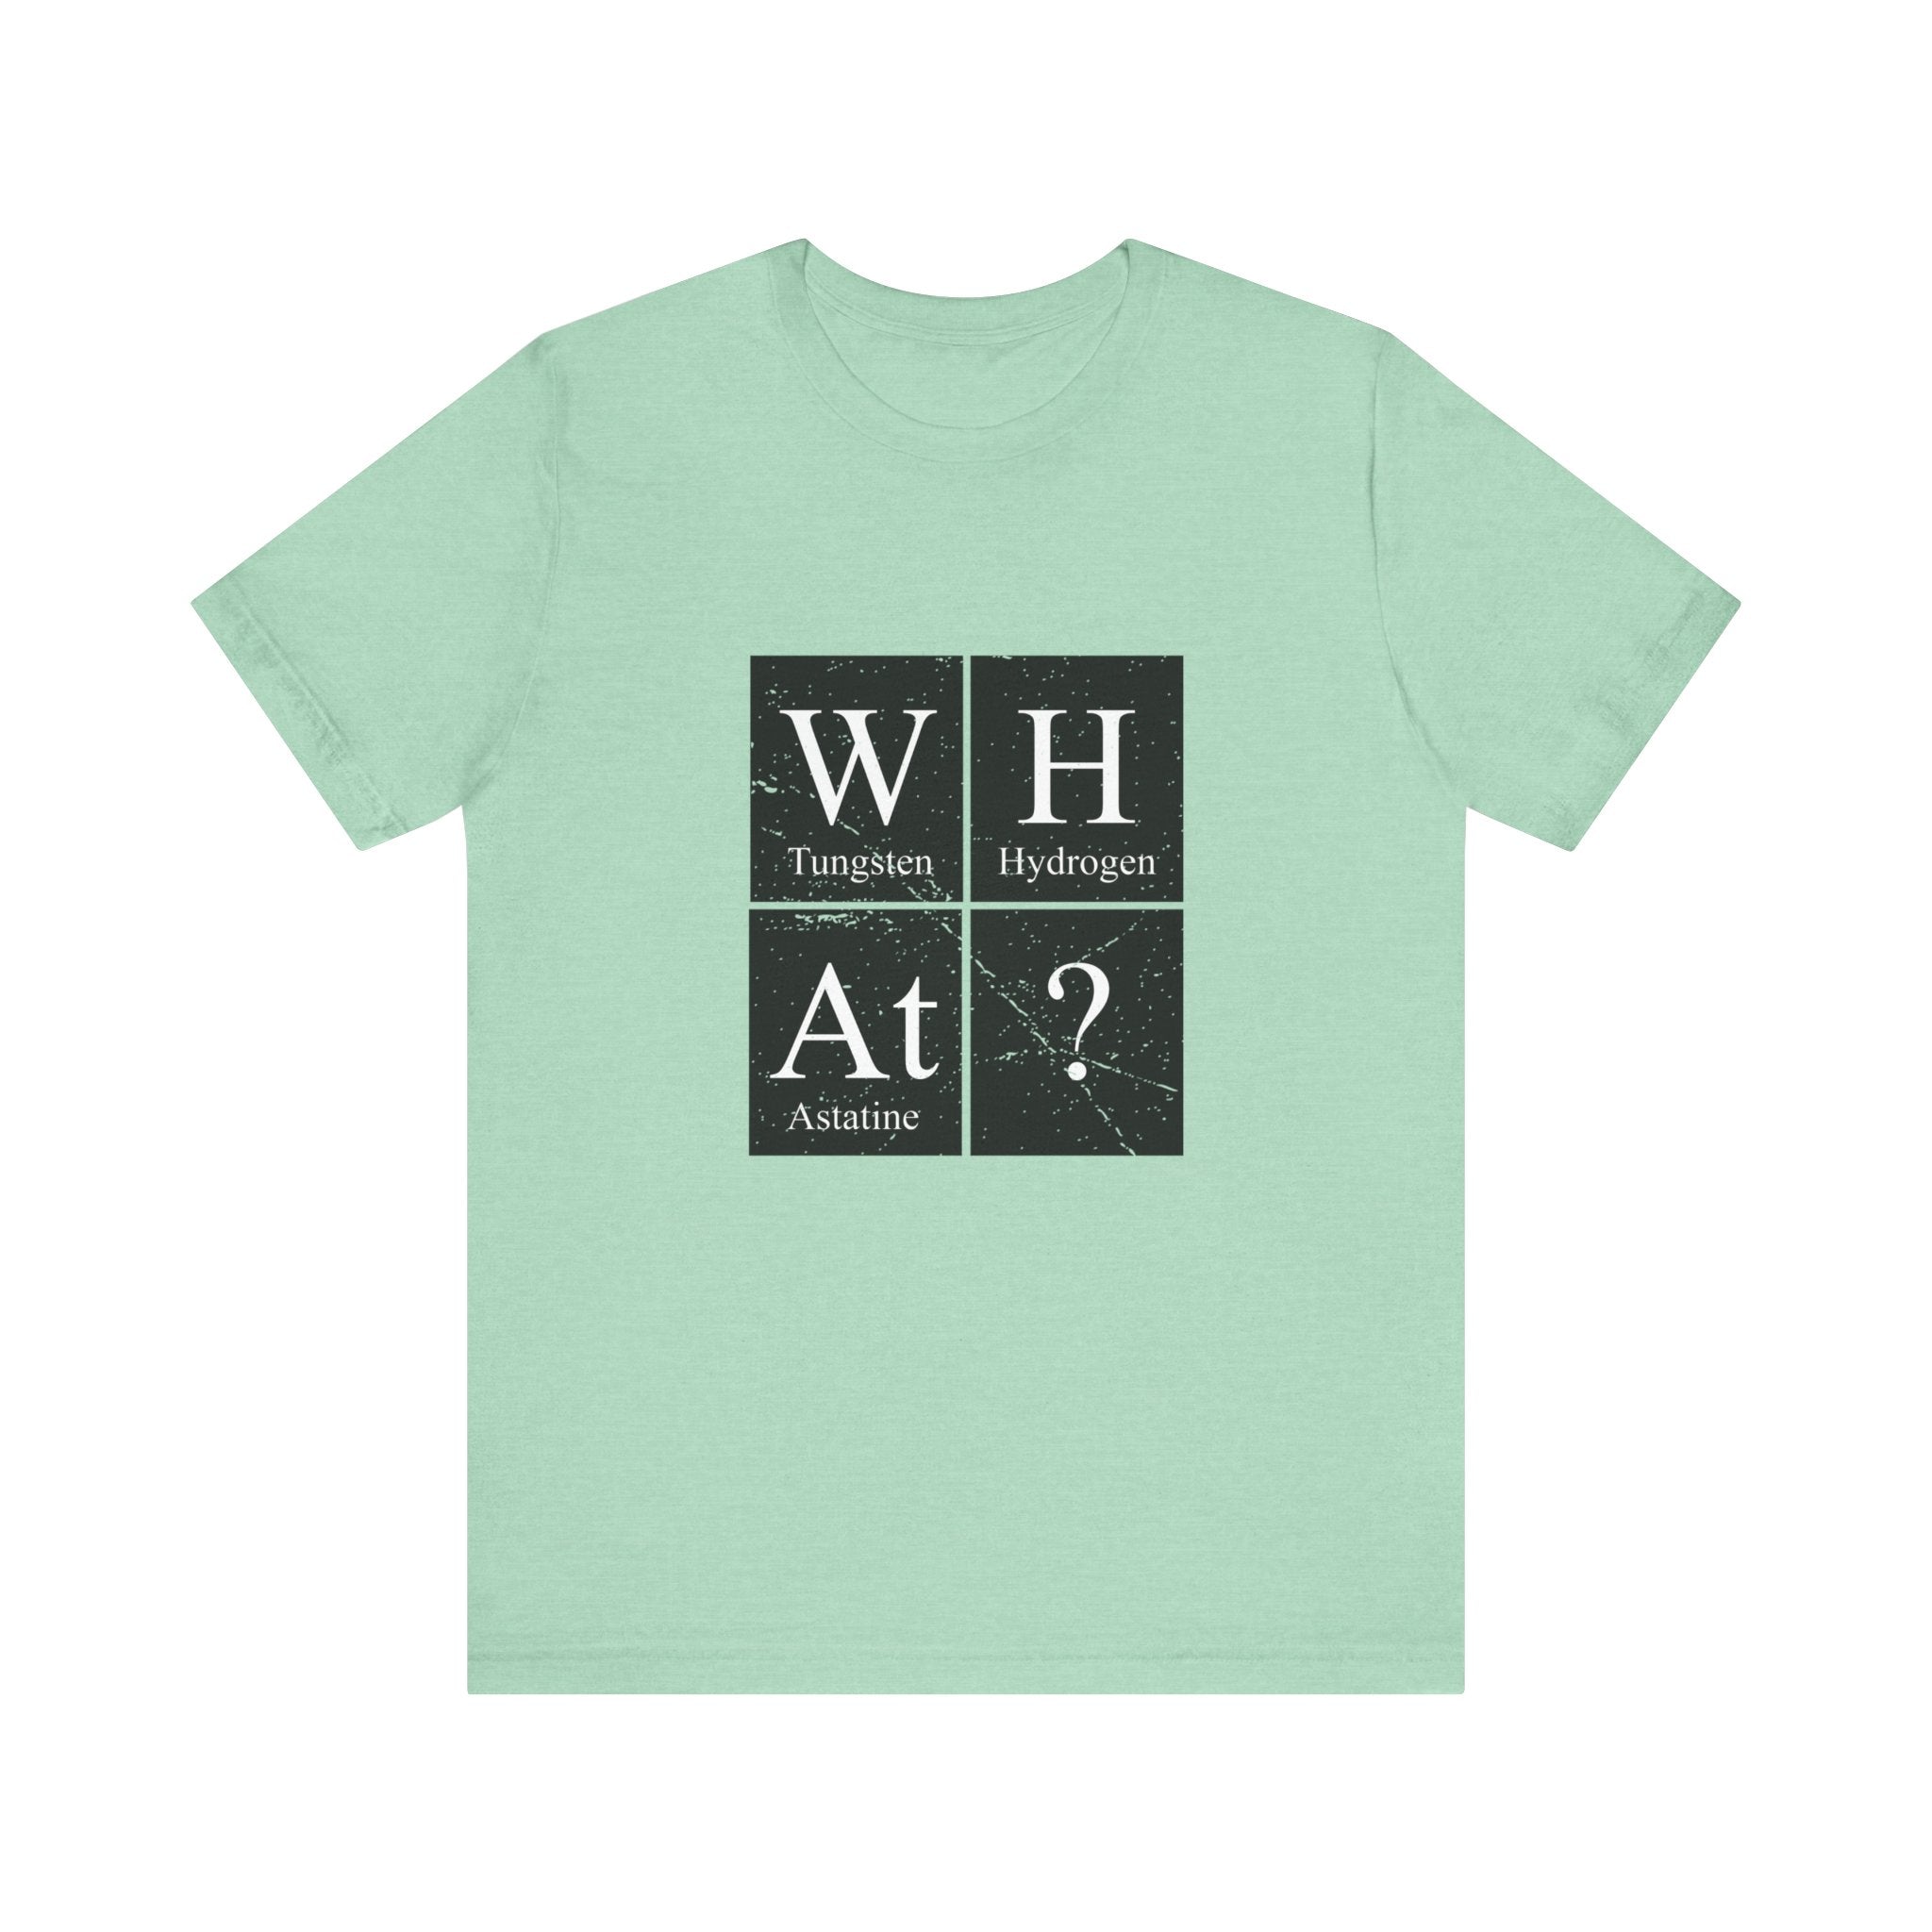 Unisex jersey tee in light green with a black square featuring the periodic table symbols for tungsten (W), hydrogen (H), and astatine (At), followed by a W-H-At-? symbol.